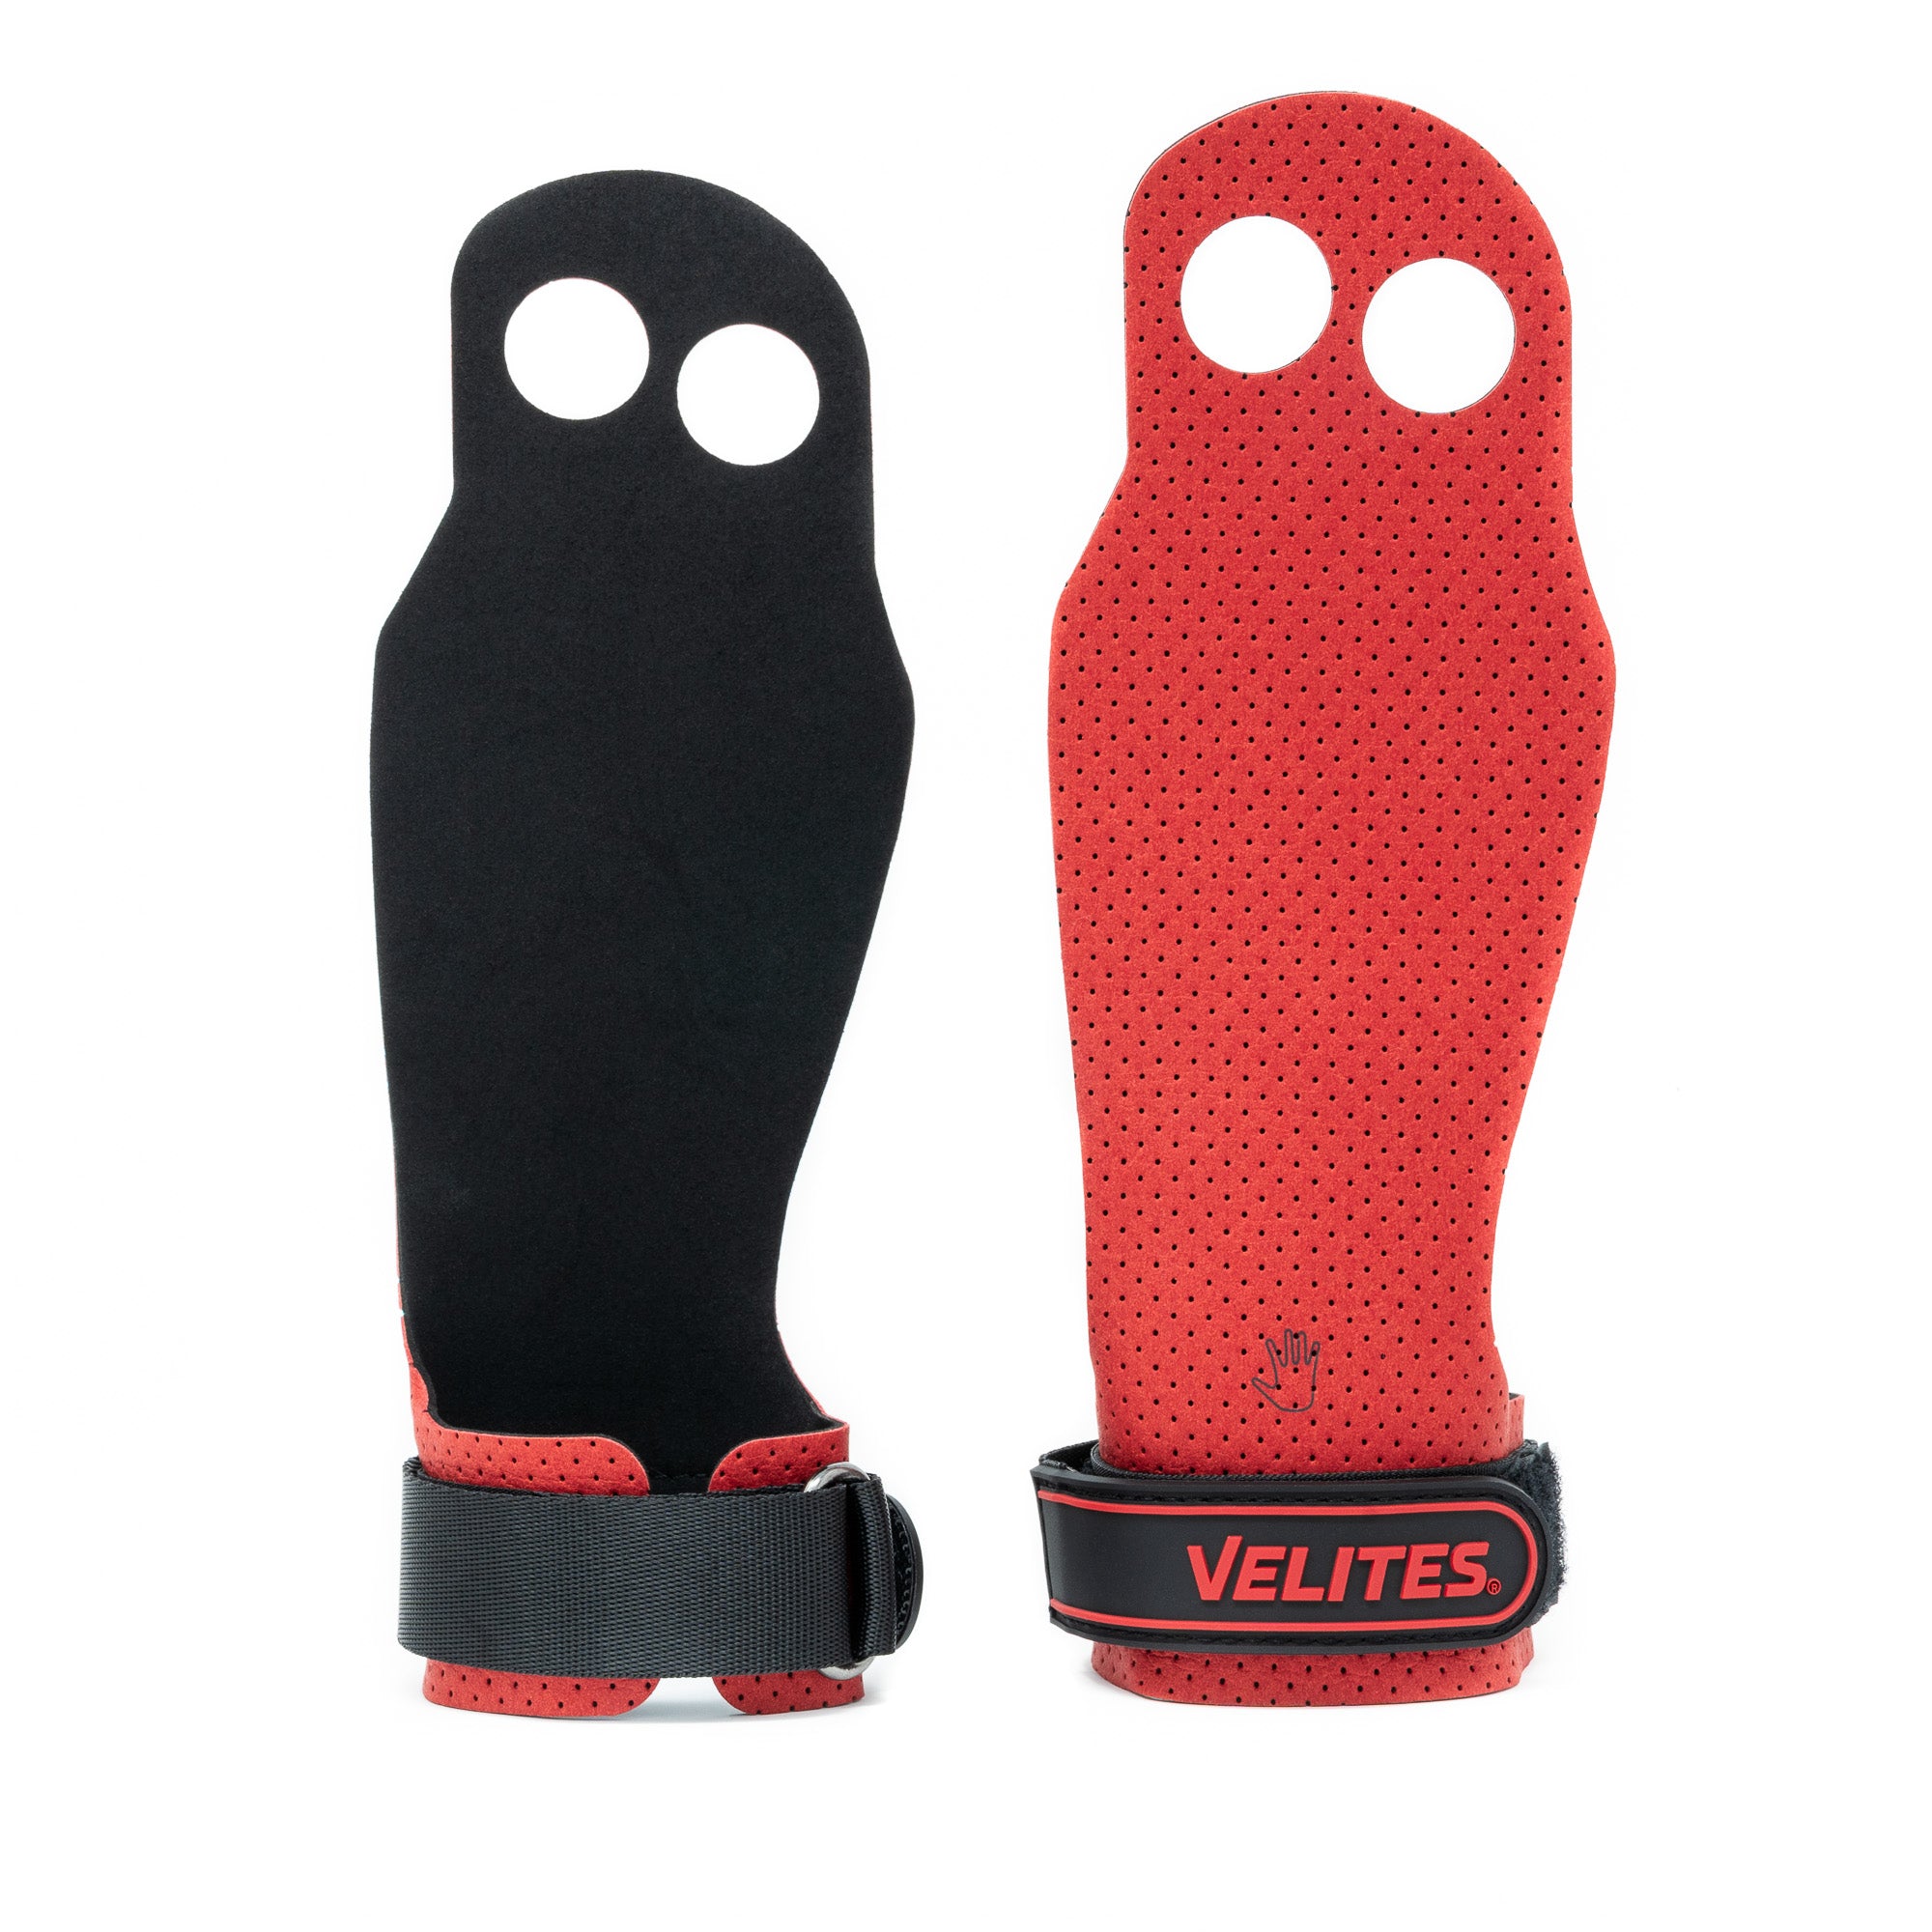 Shell Pro Wave Hand Grips